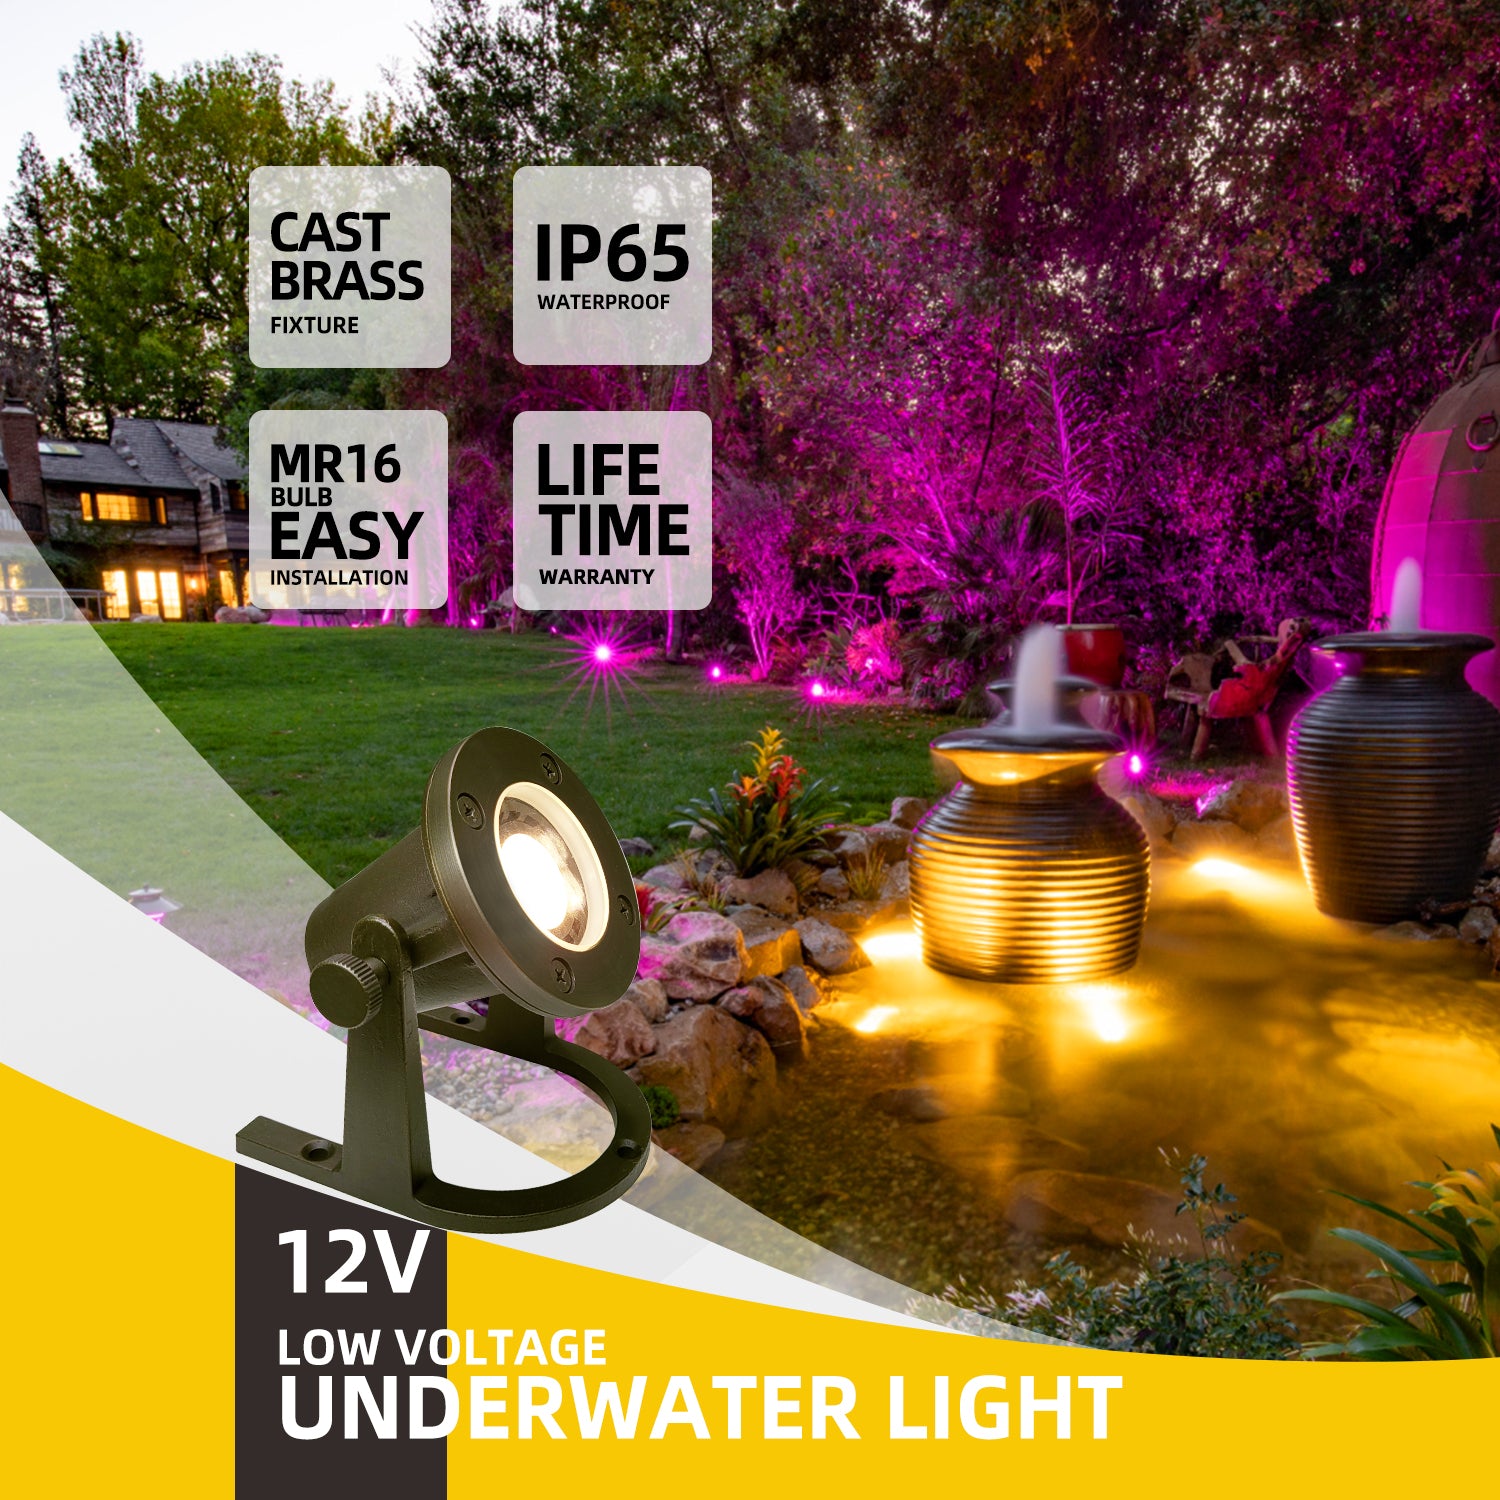 Low voltage brass underwater landscape light illuminating a pond and garden with cast brass, IP65 waterproof, easy installation MR16 bulb, and lifetime warranty features